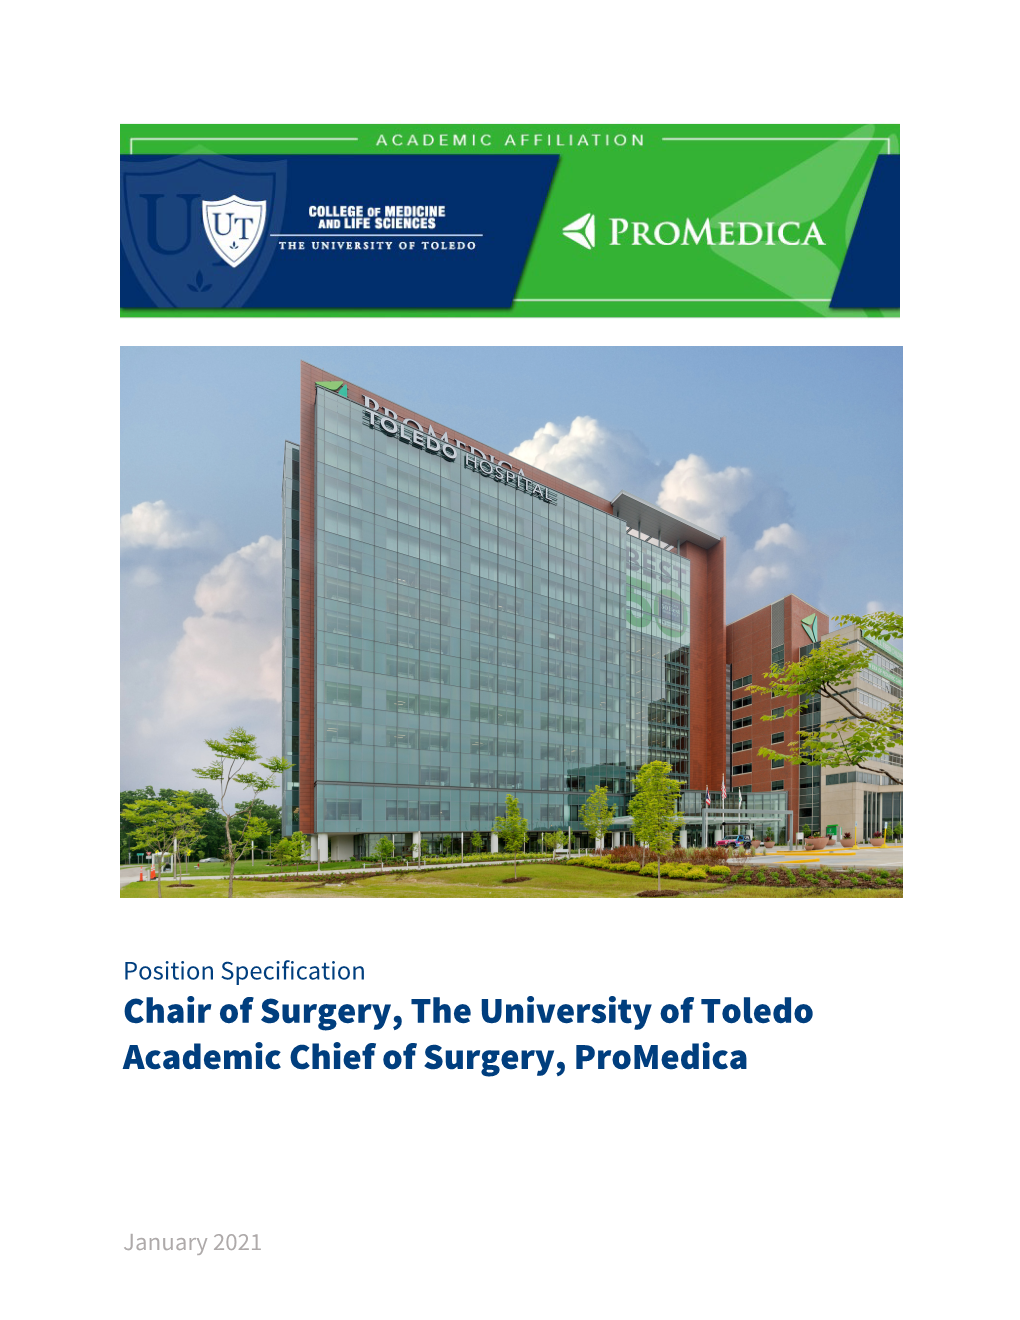 Chair of Surgery, the University of Toledo Academic Chief of Surgery, Promedica